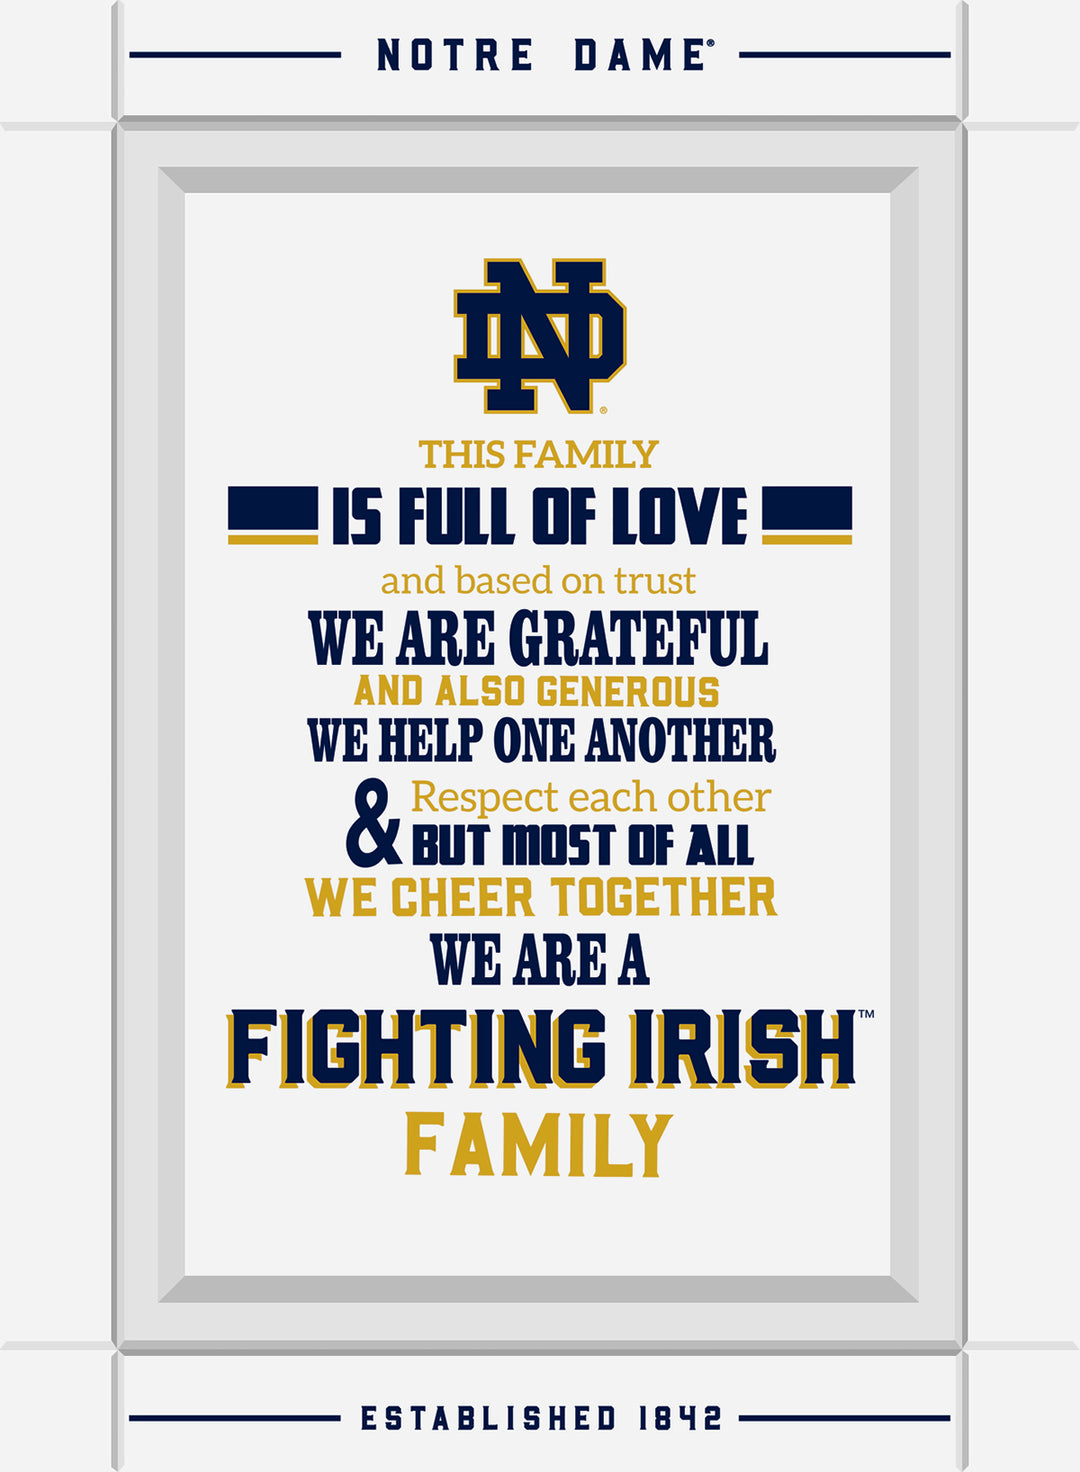 Notre Dame Fighting Irish This Family Wall Sign